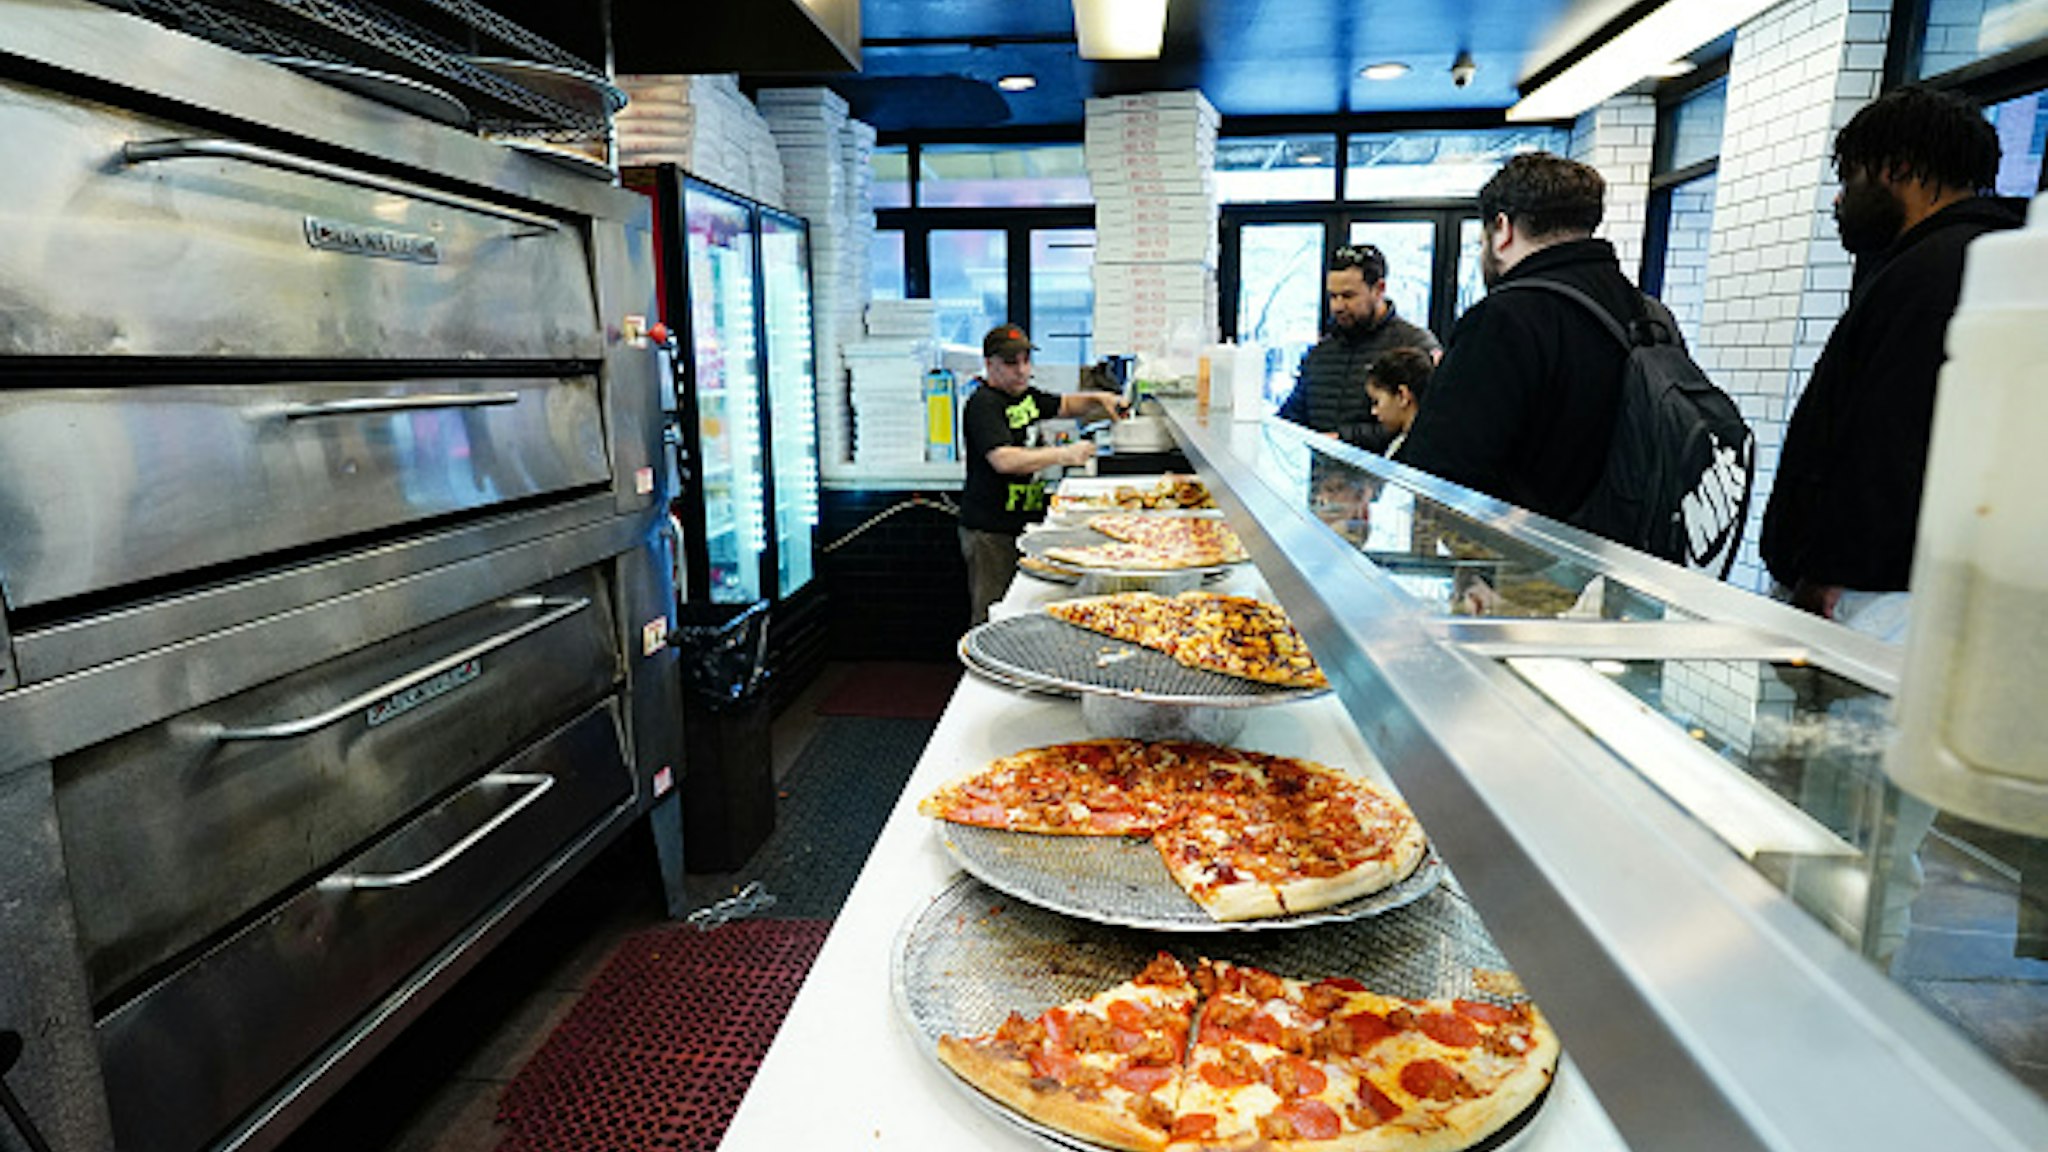 A view of a a closed-off area of a pizza parlor amid the coronavirus (COVID-19) outbreak on March 24, 2020 in New York City